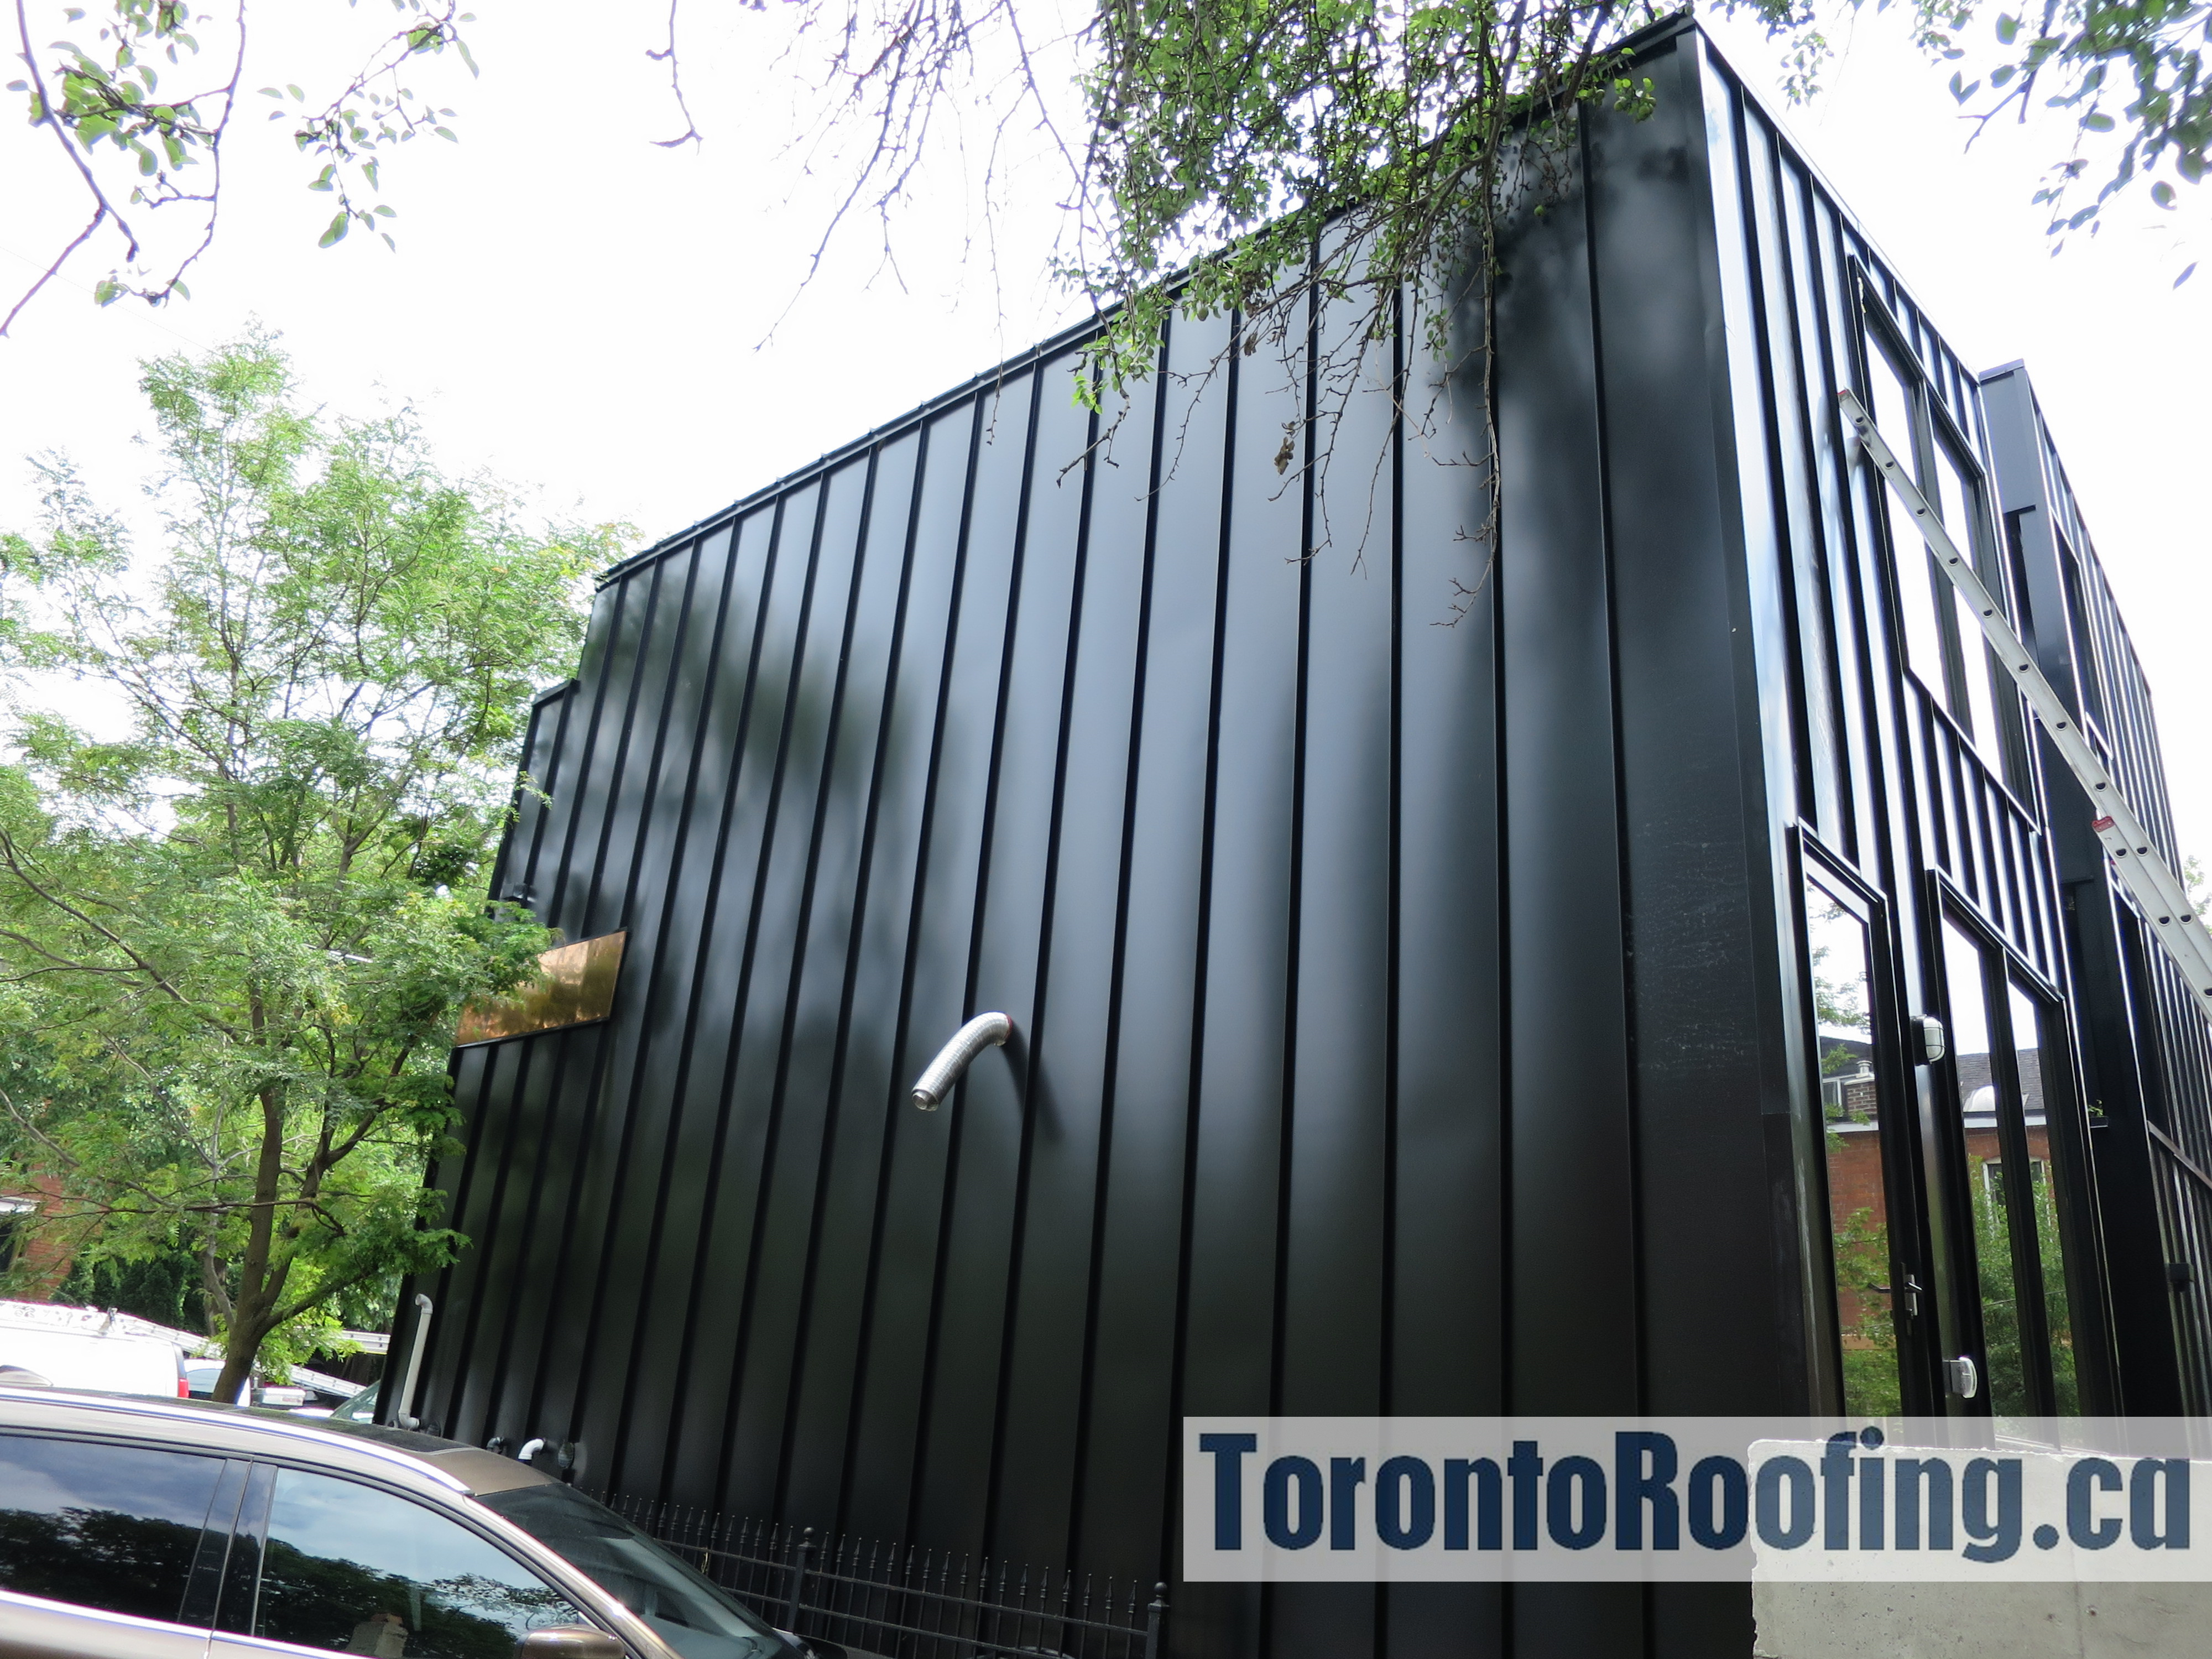 toronto-roofing-roof-siding-metal-copper-wood-modern-homes-aluminum-cladding-architeture-building-contractor-exterior-5